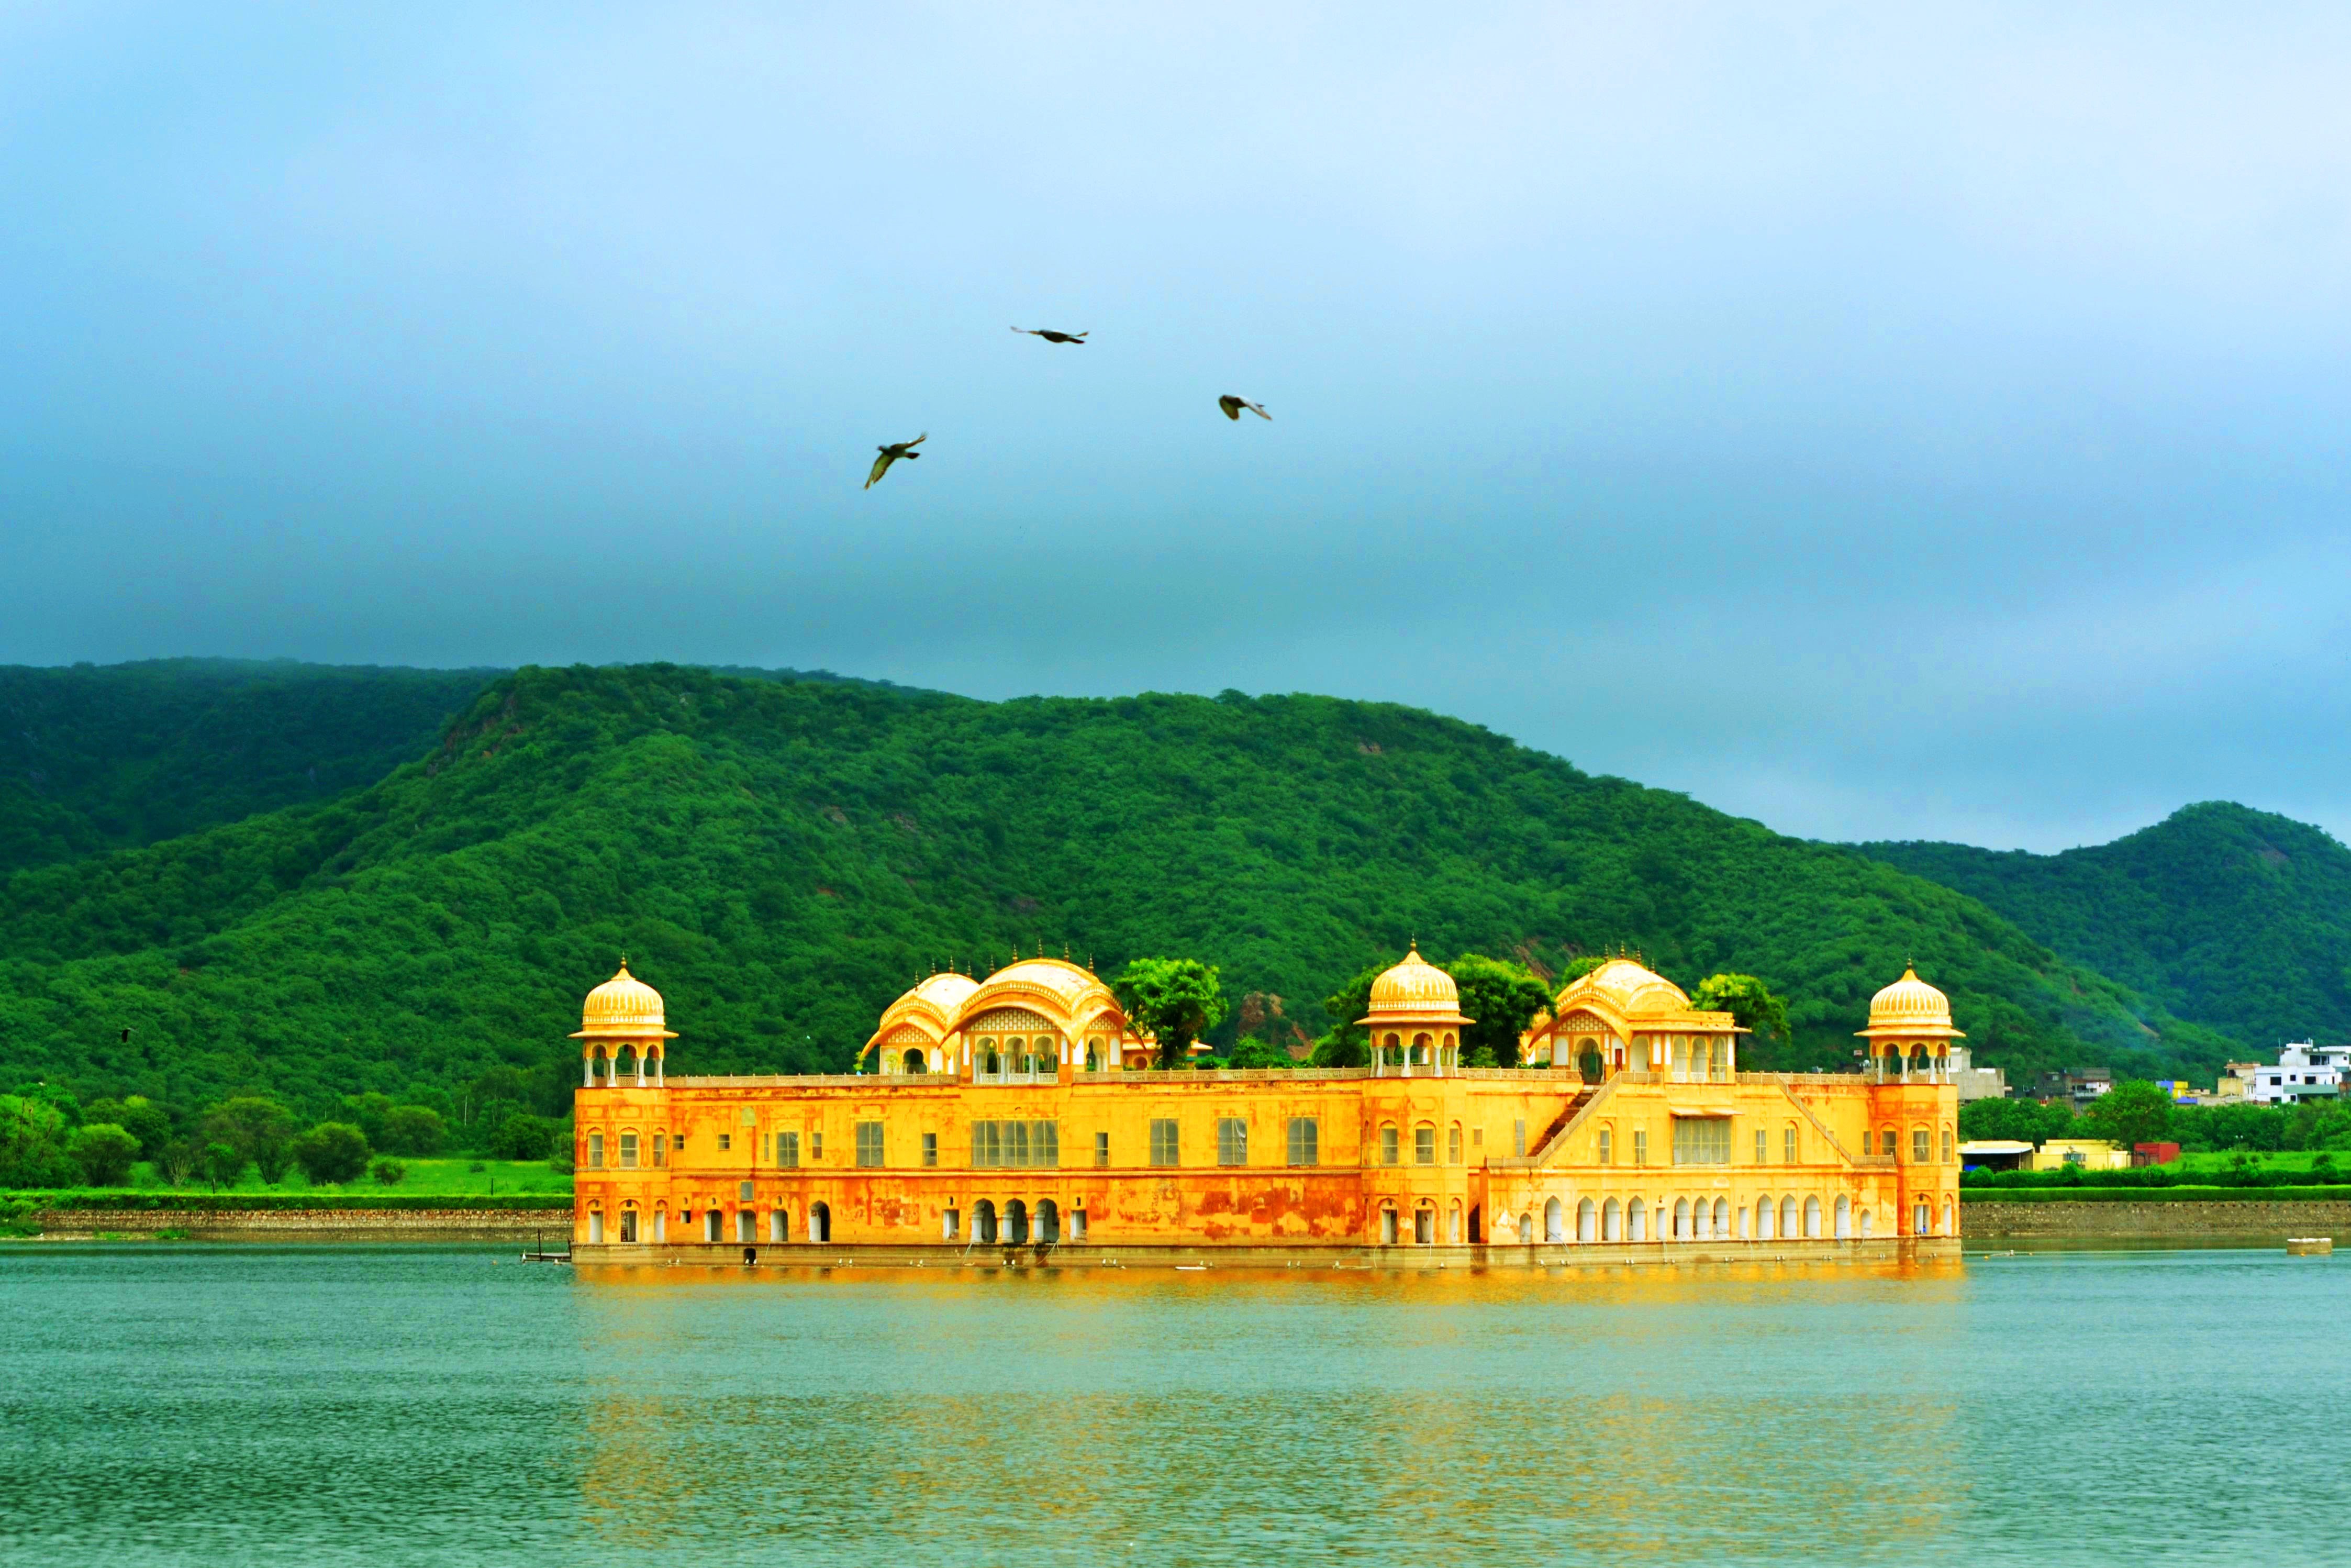 The Jal Mahal with birds flying atop, Jaipur, India